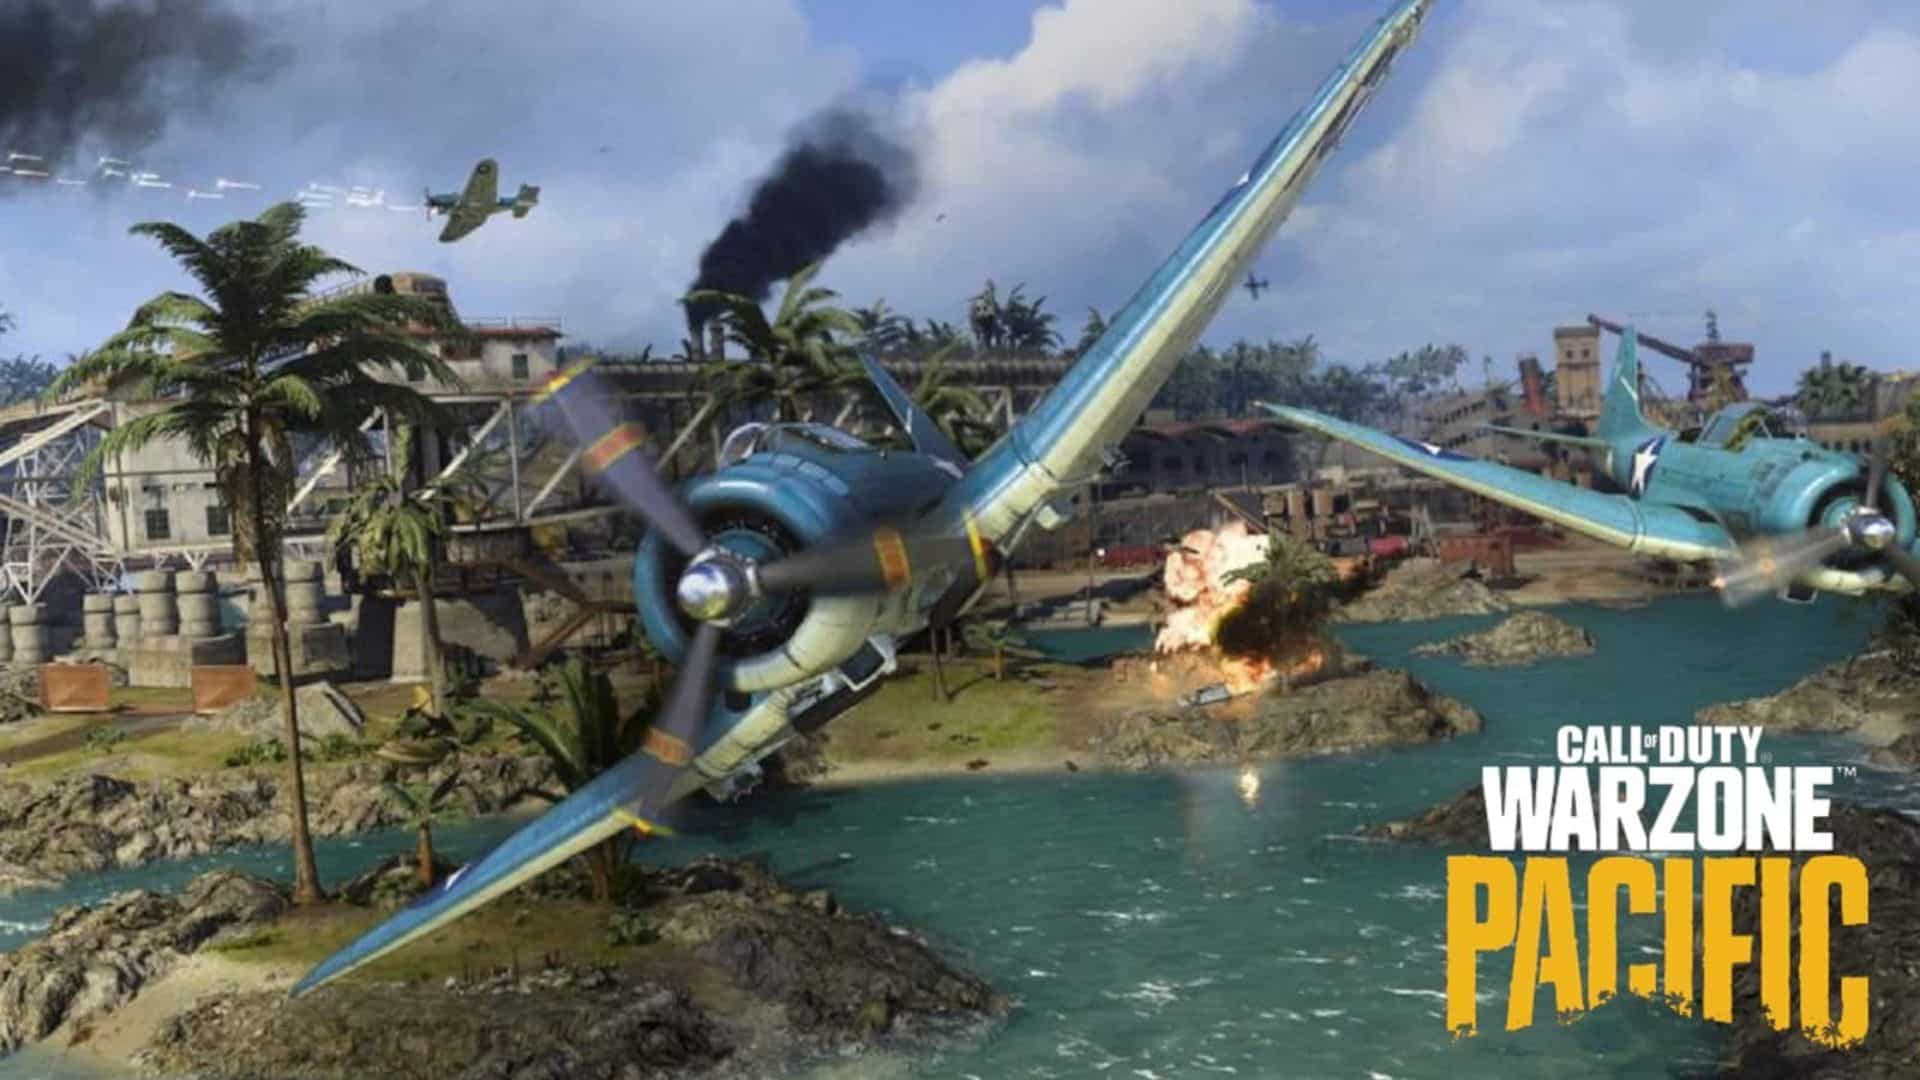 fighter planes flying in warzone pacific